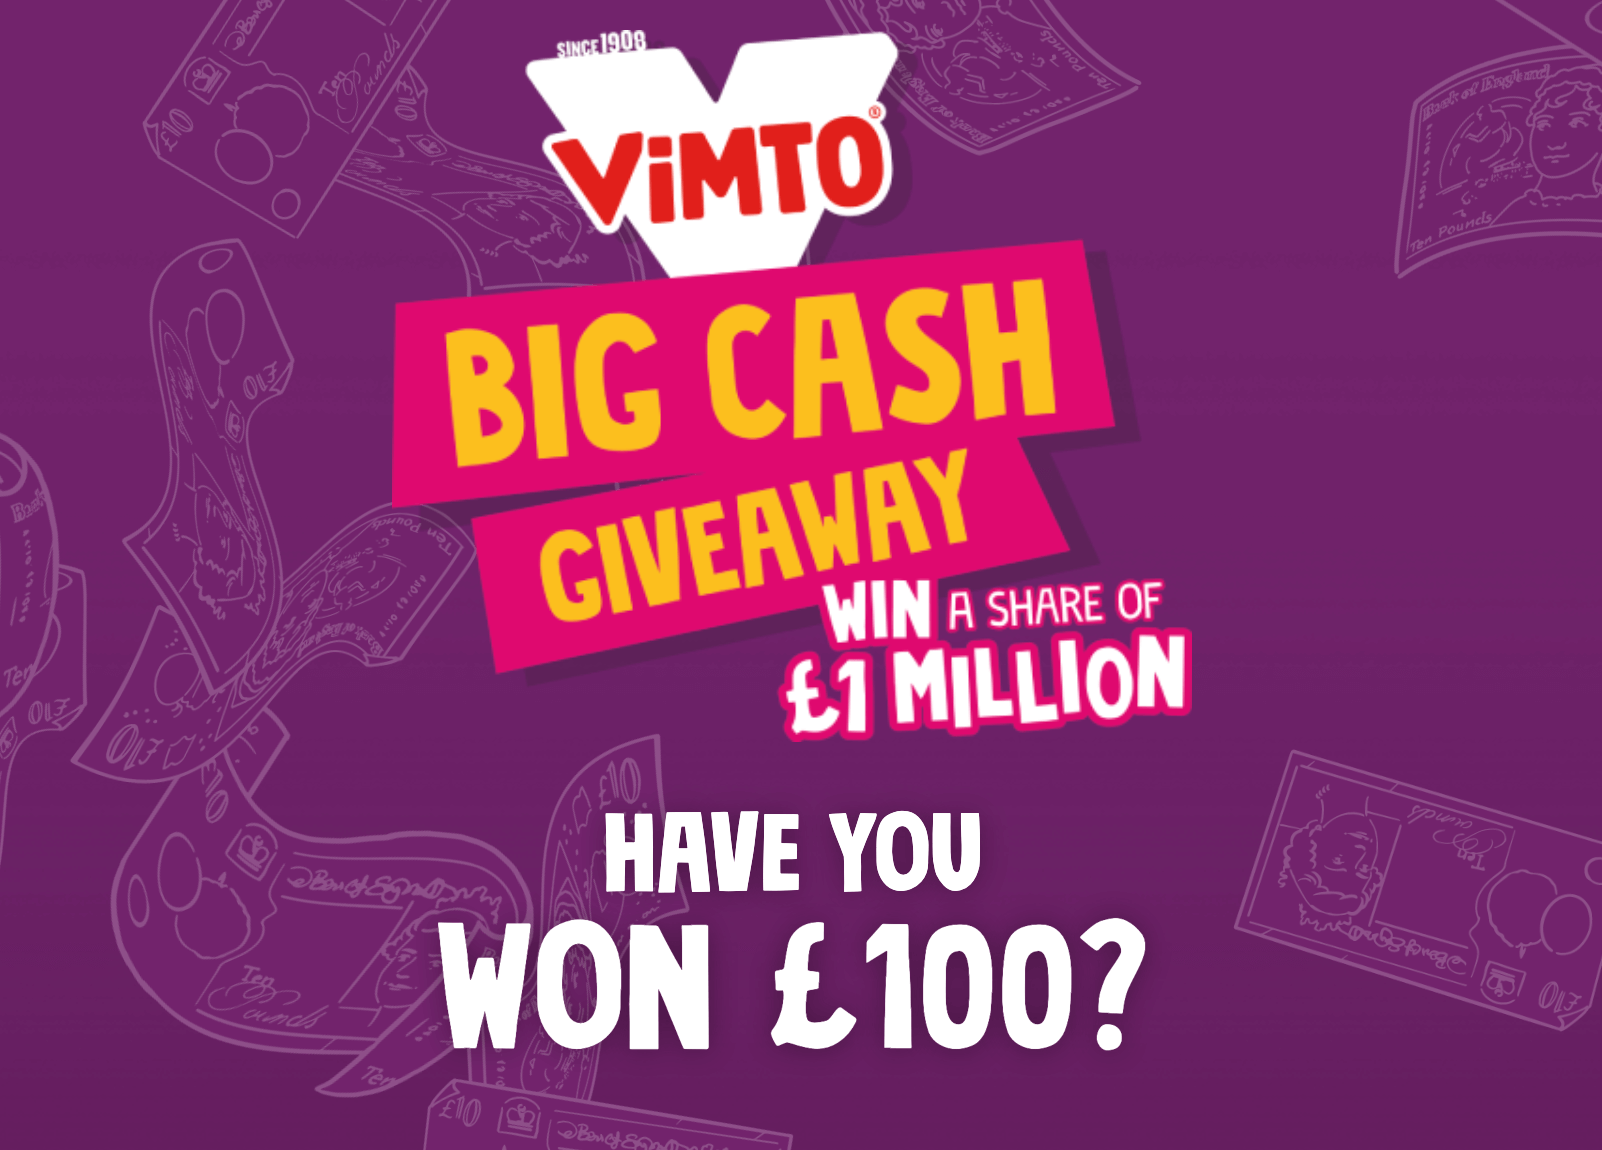 Vimto Big Cash Giveaway: Win a share of £1 Million cash